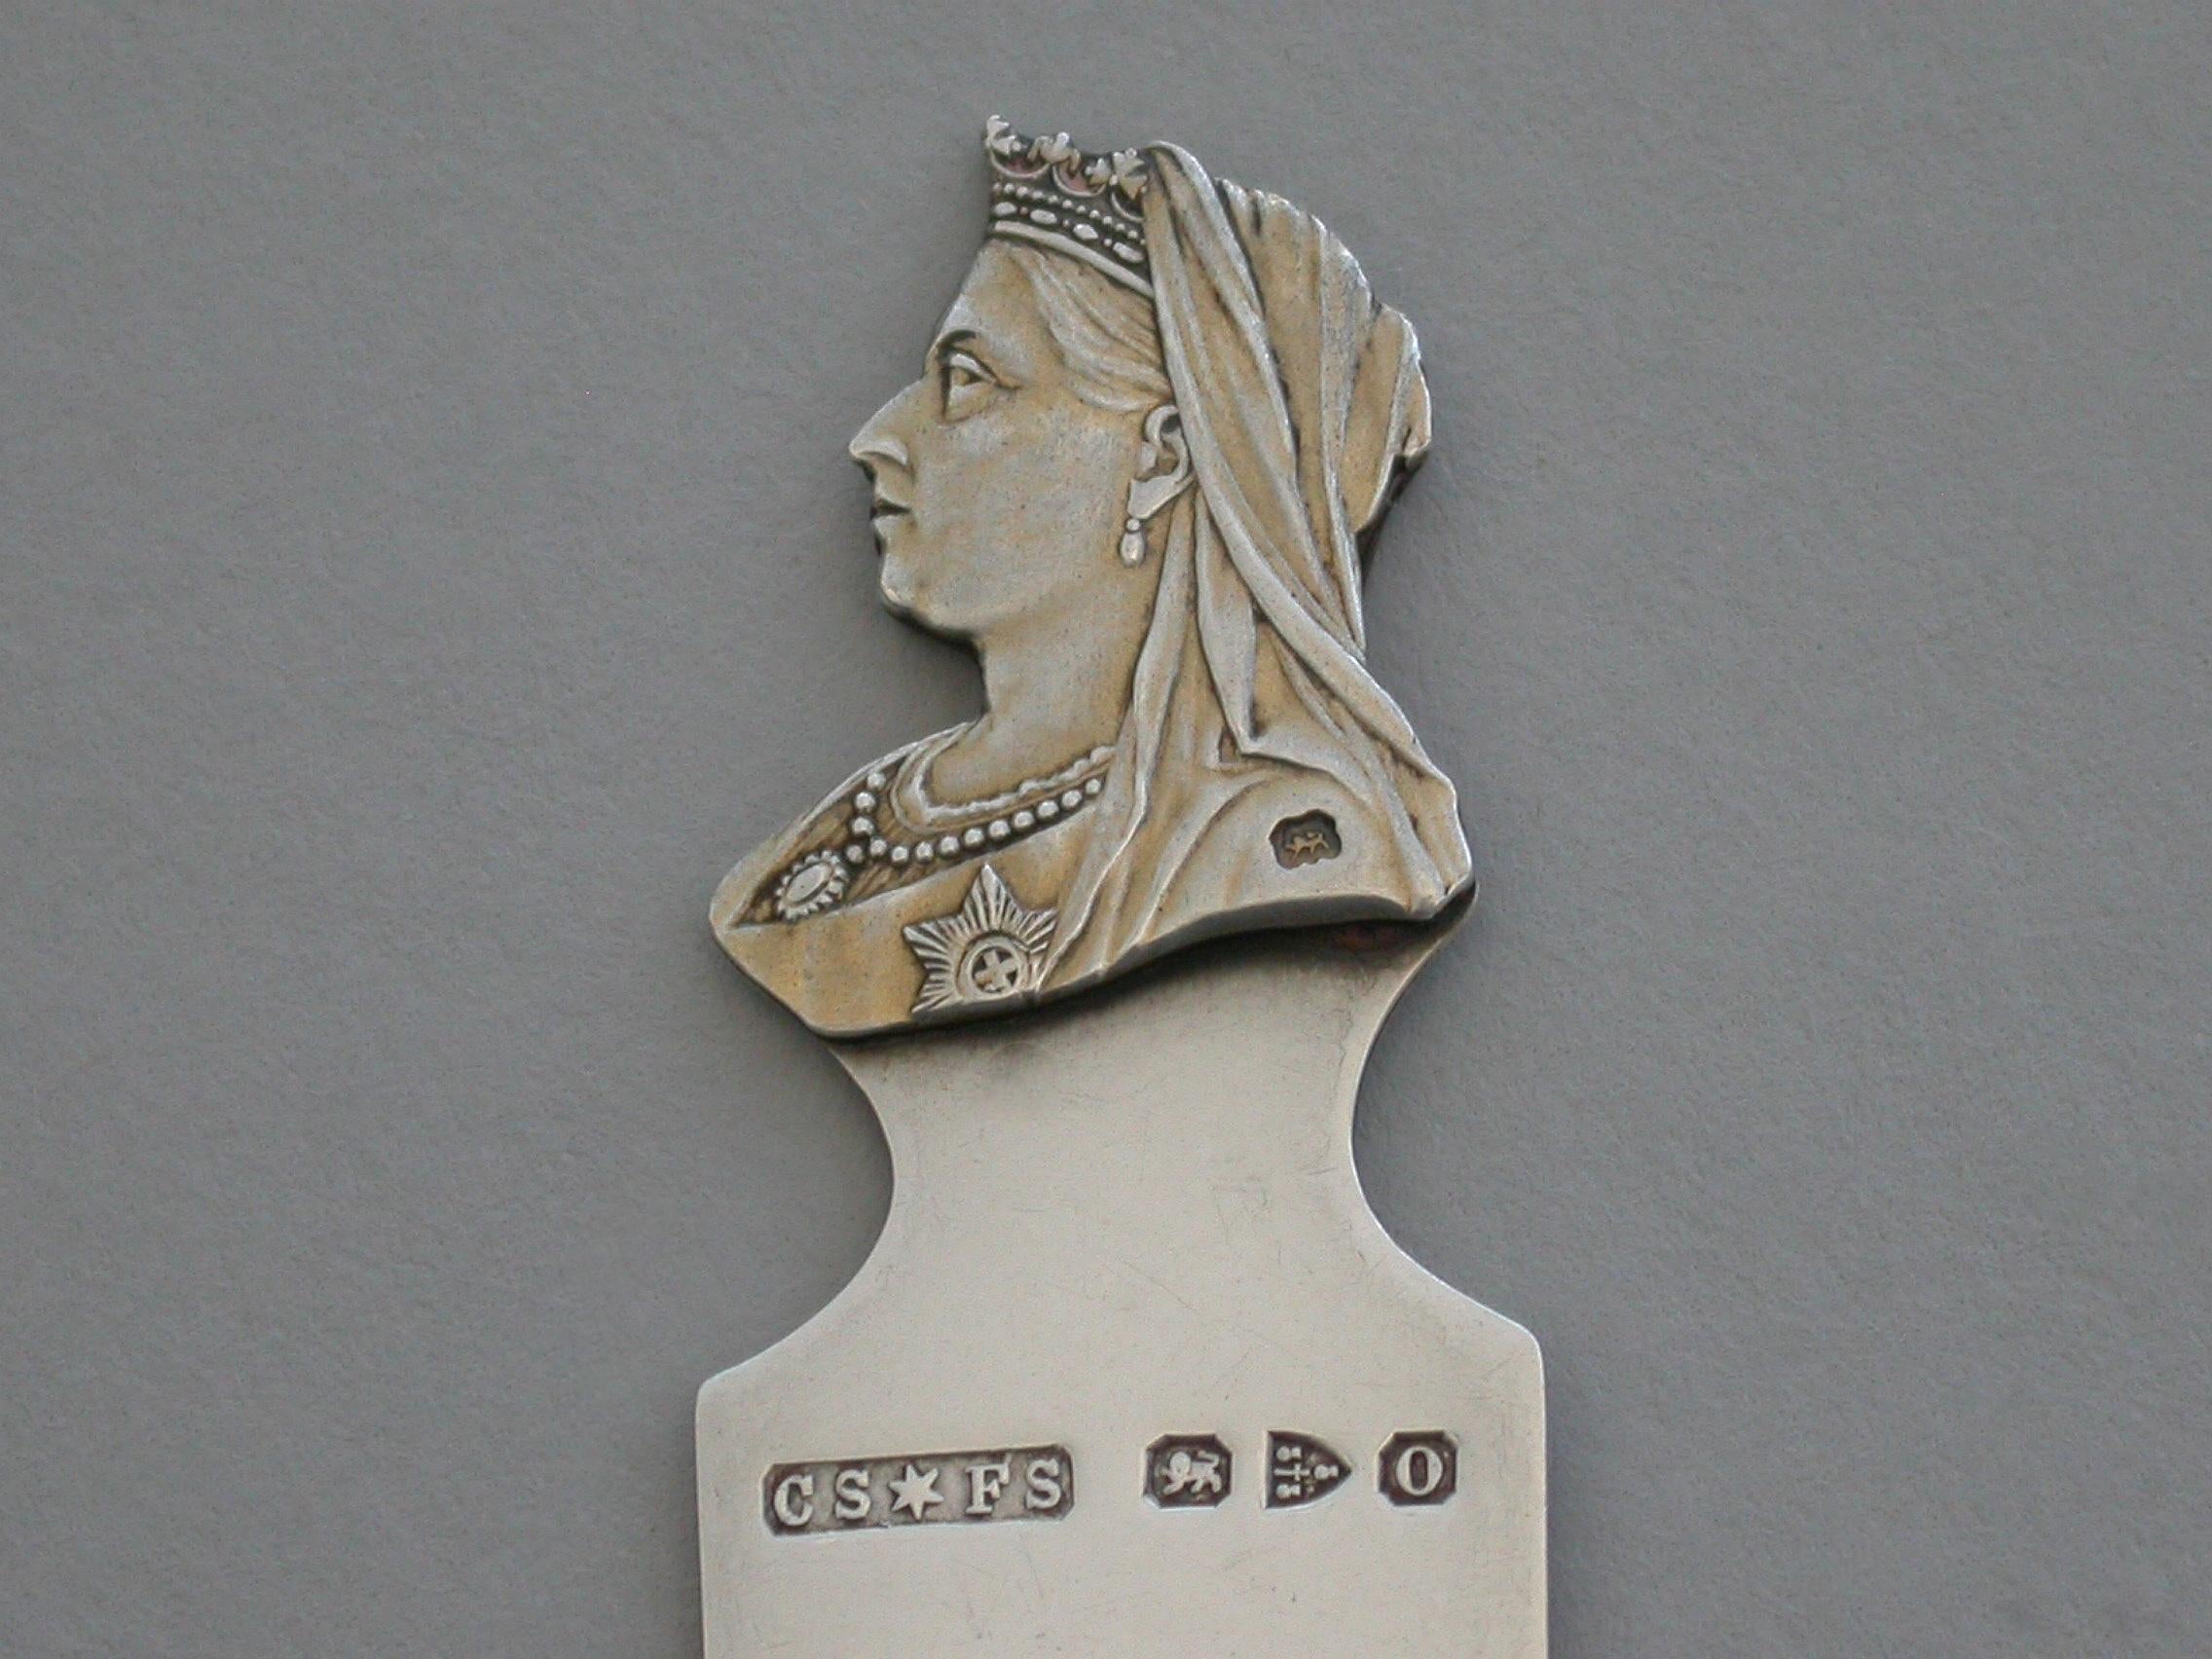 A good Victorian parcel gilt silver bookmark, the terminal formed as a bust of Queen Victoria. Made to commemorate the Diamond Jubilee of Victoria in 1897.

By Saunders & Shepherd, Chester, 1897

In good condition with no damage or